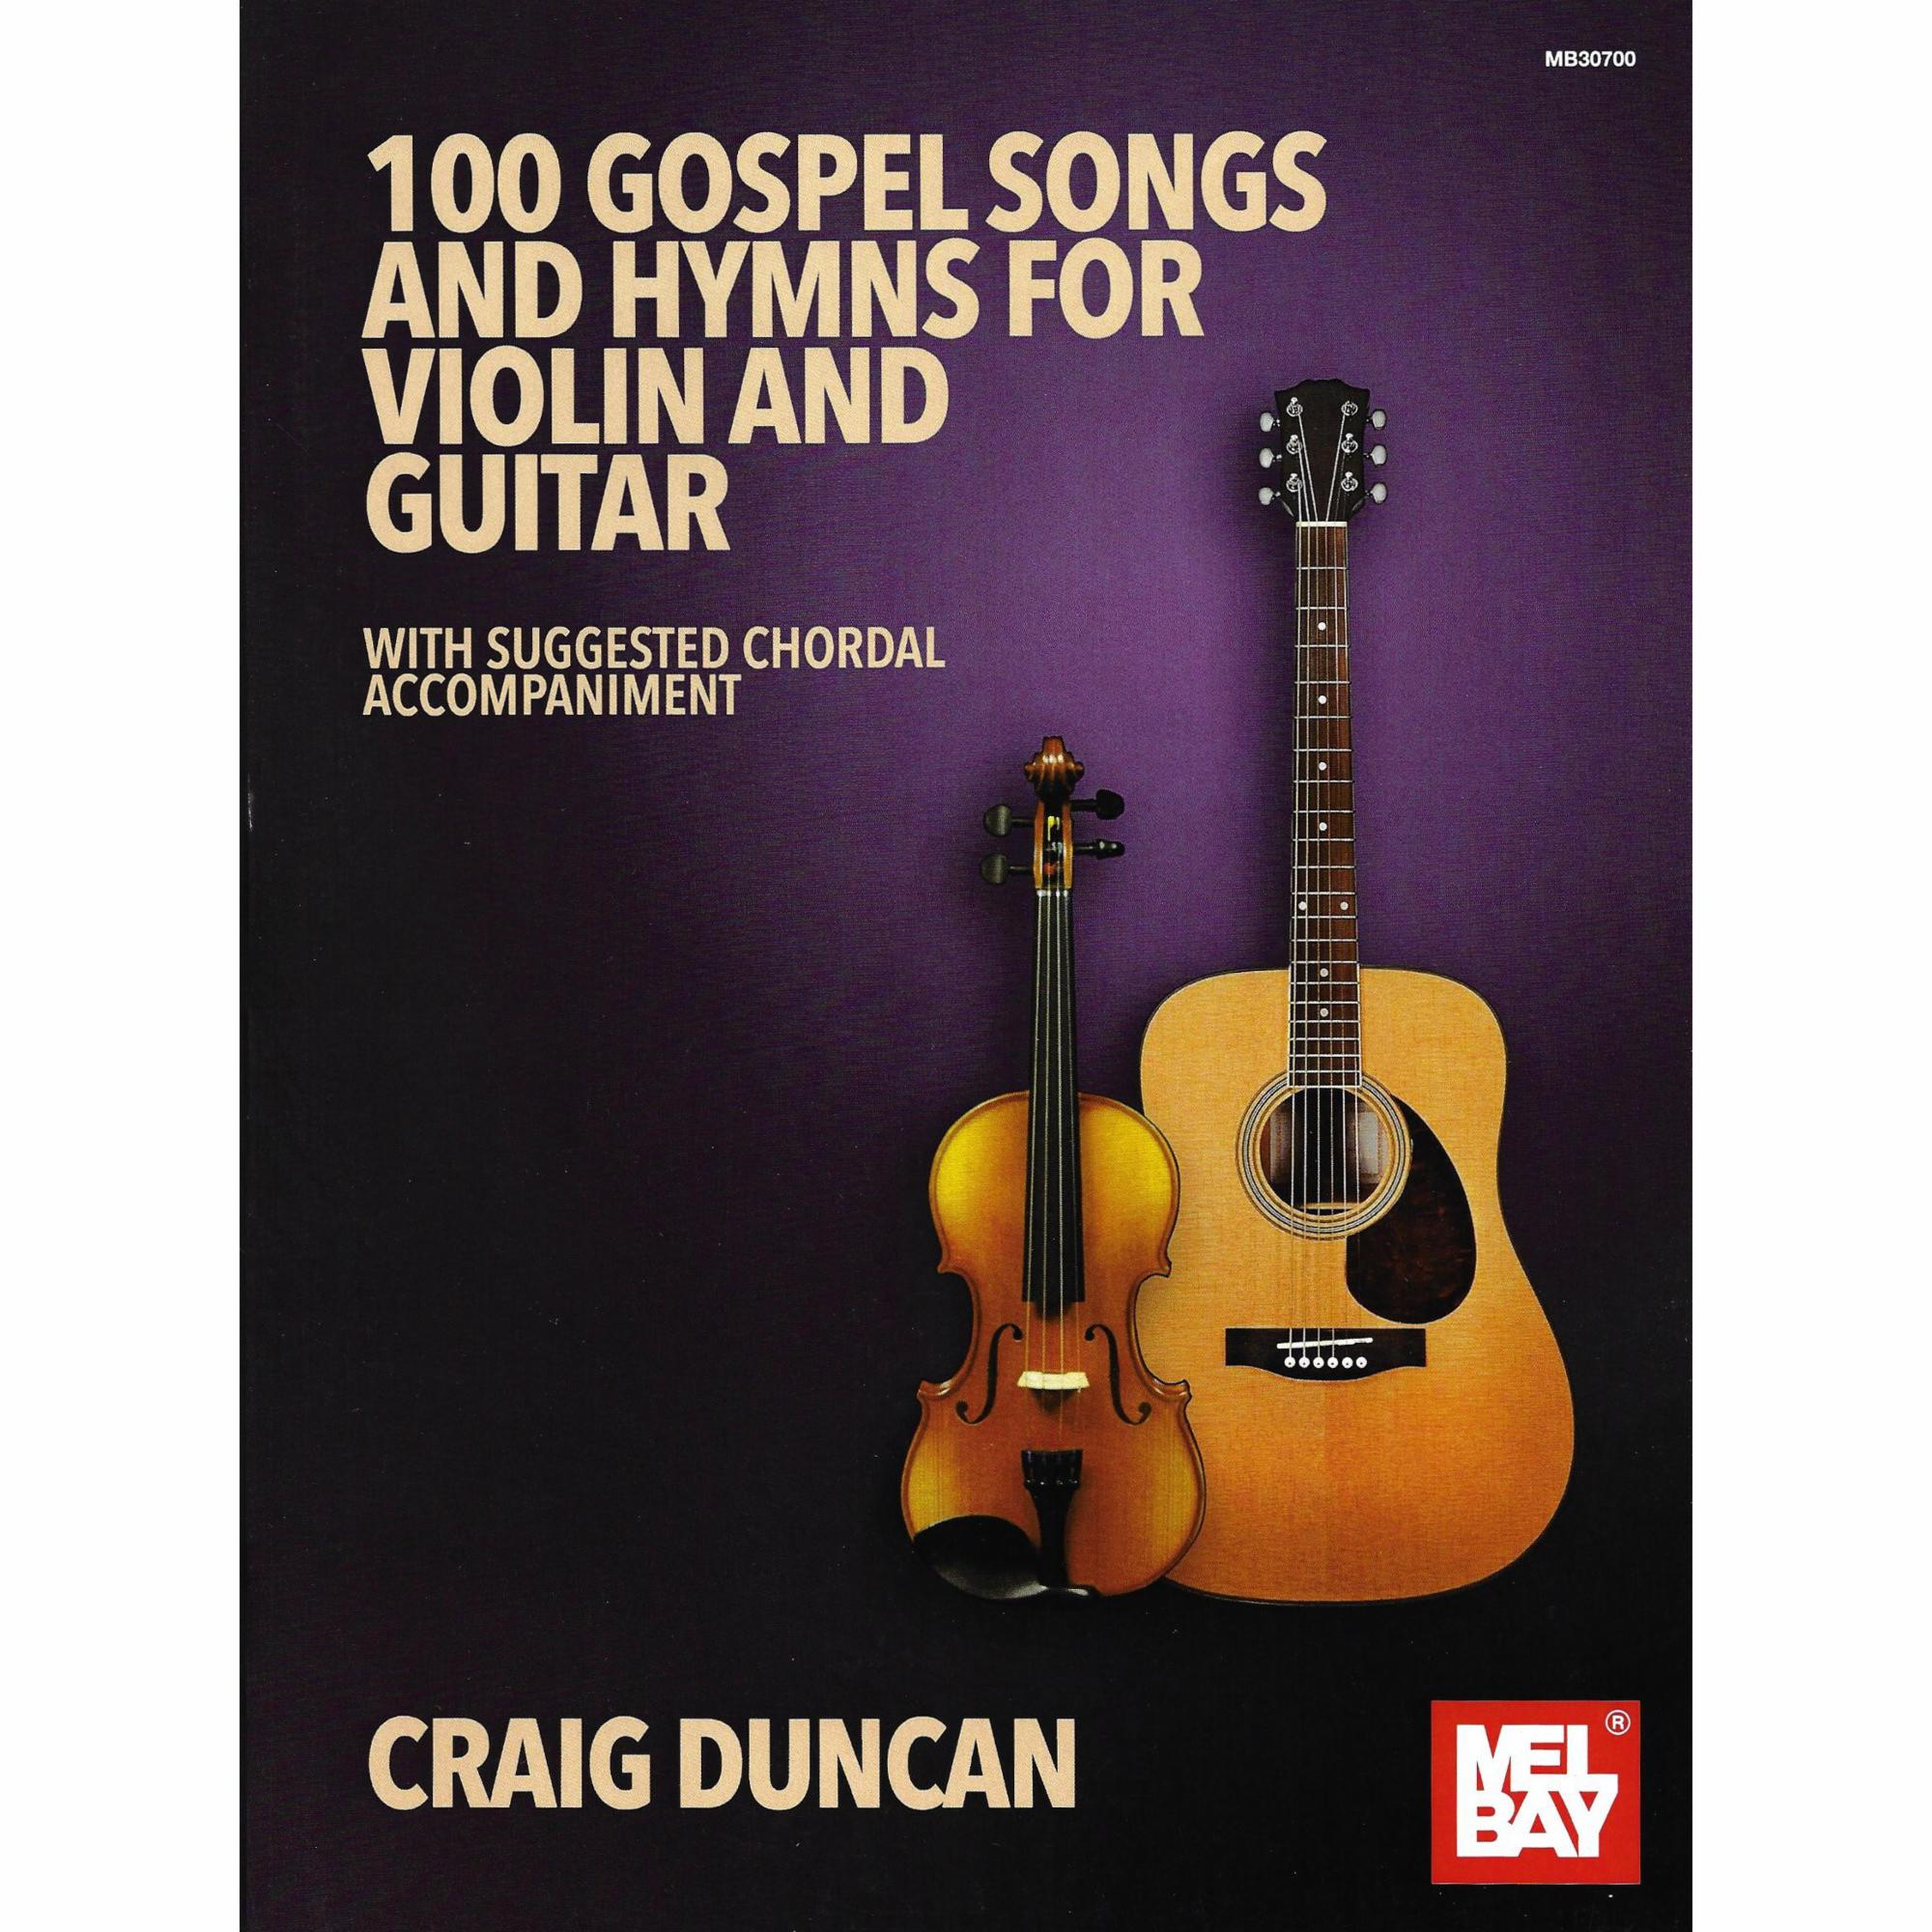 100 Gospel Songs and Hymns for Violin or Cello and Guitar